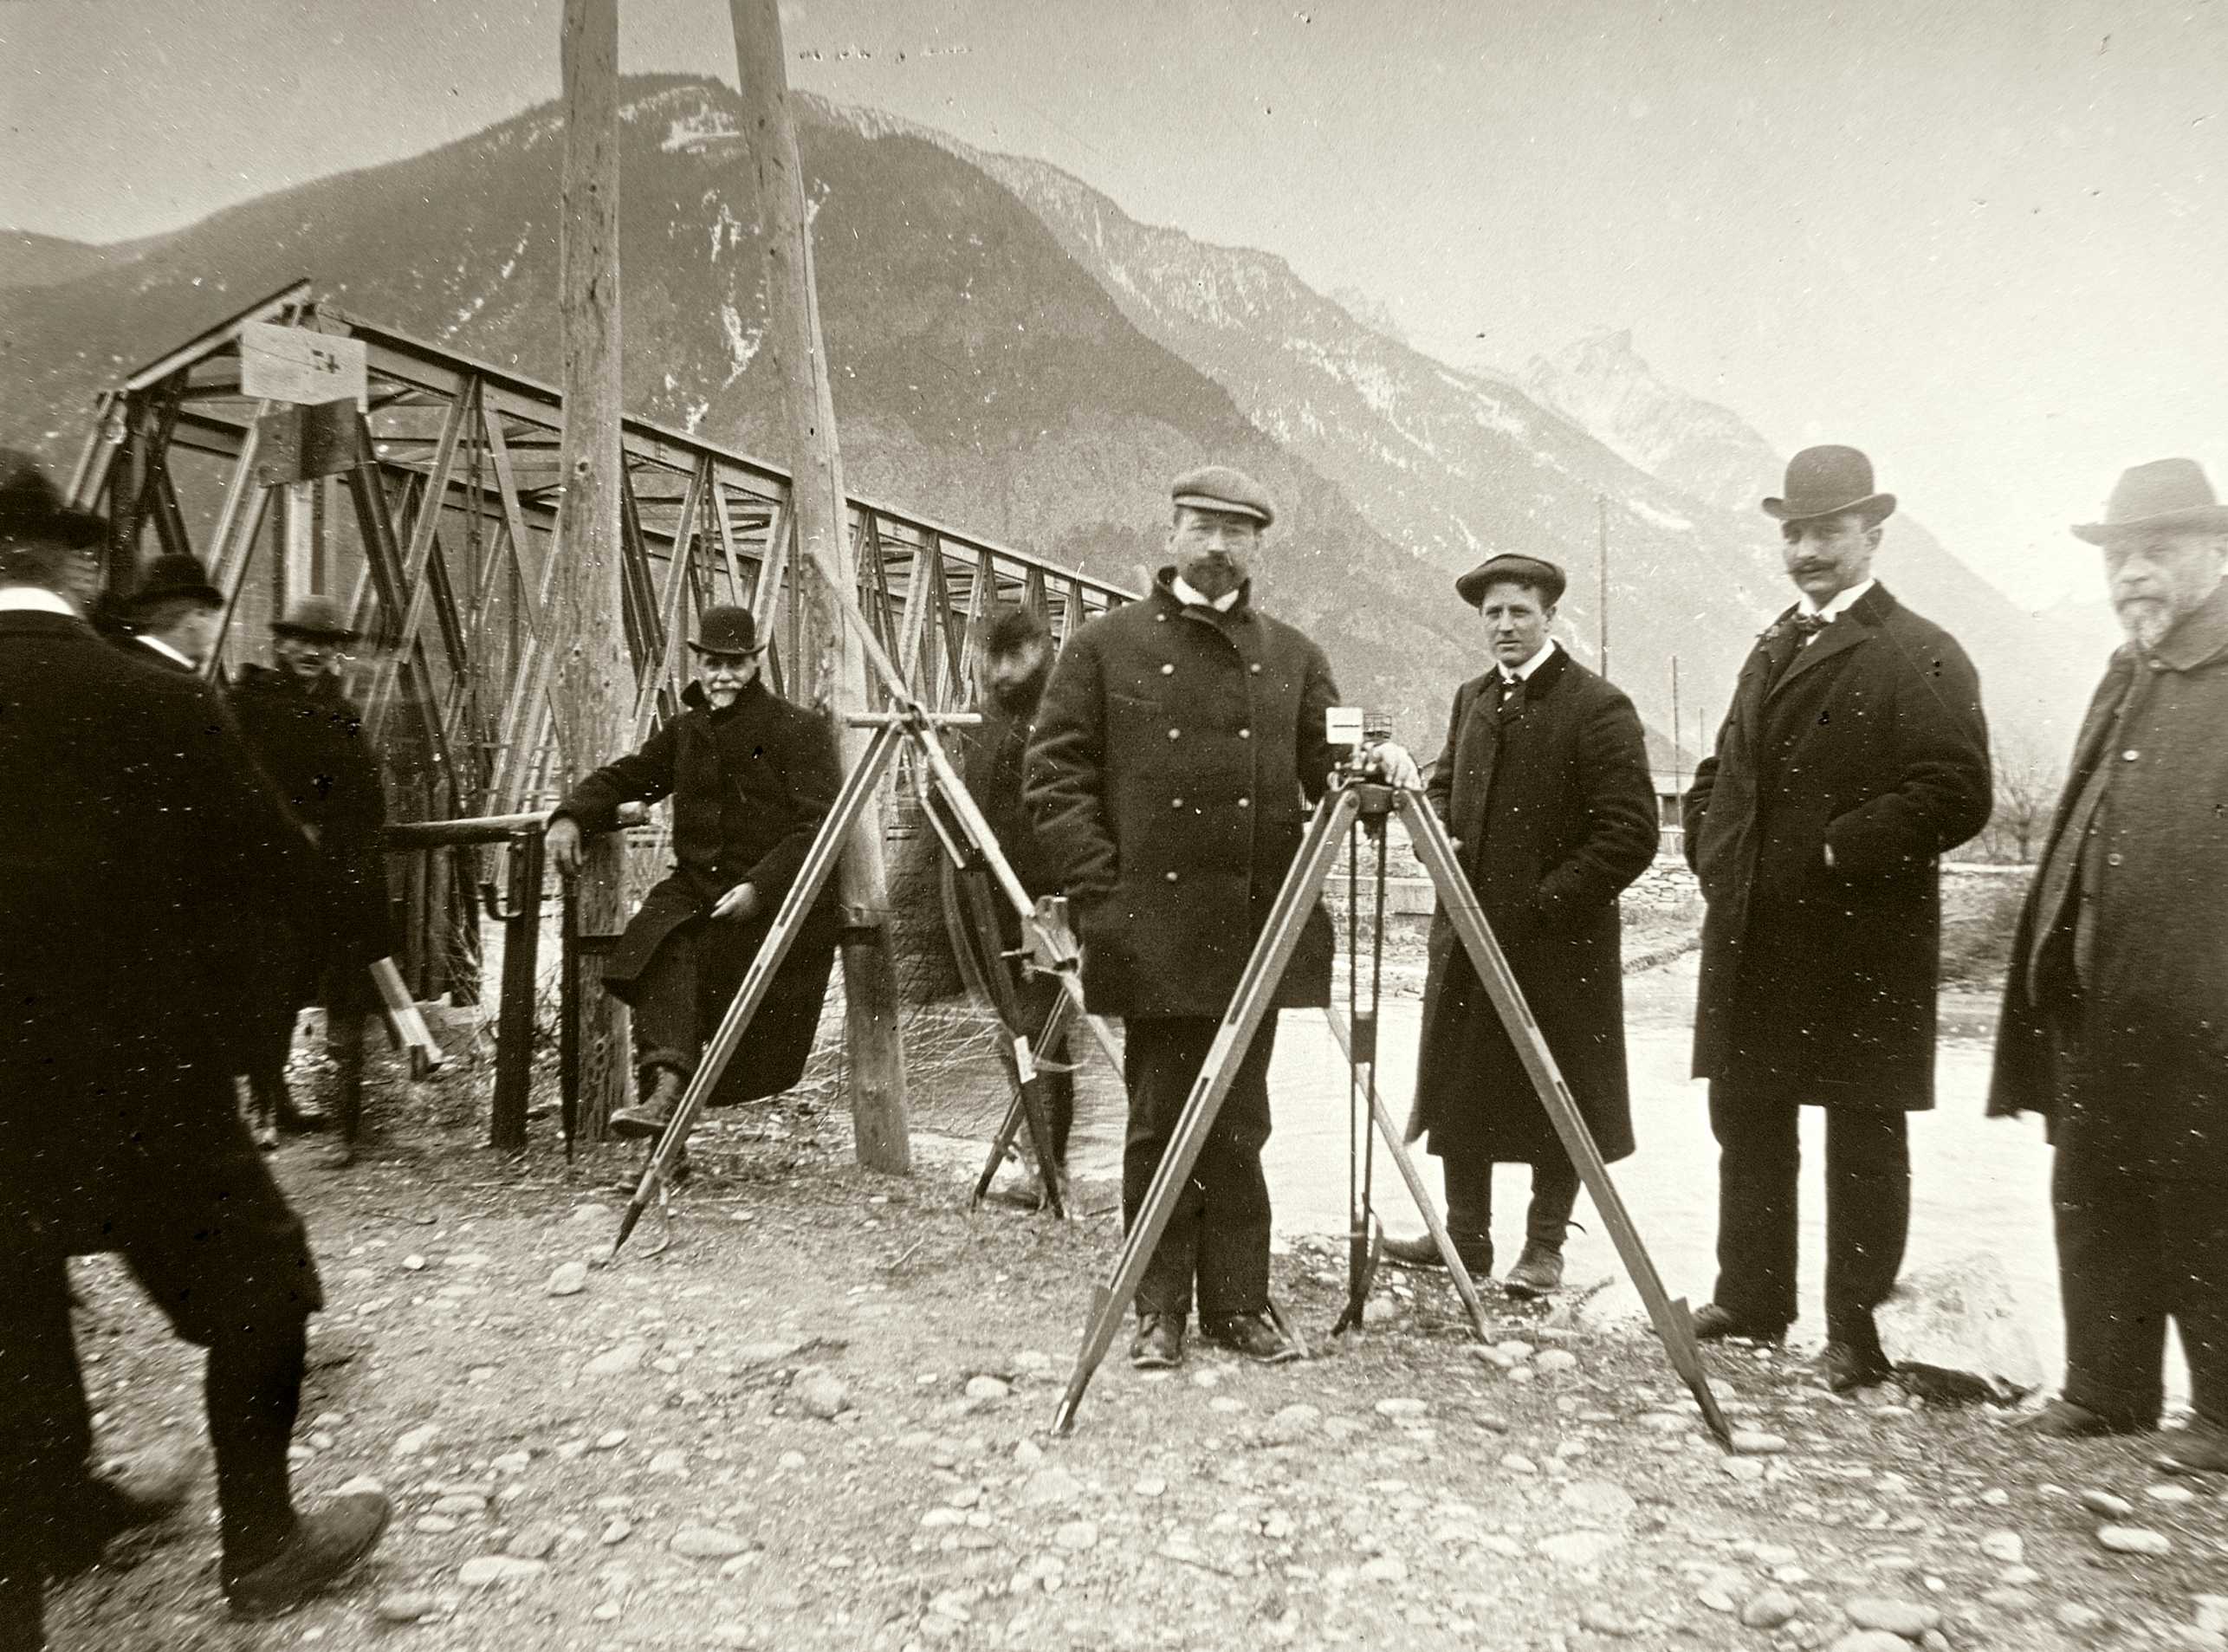 Enlarged view: Survey of the Simplon base tunnel, ca. 1906